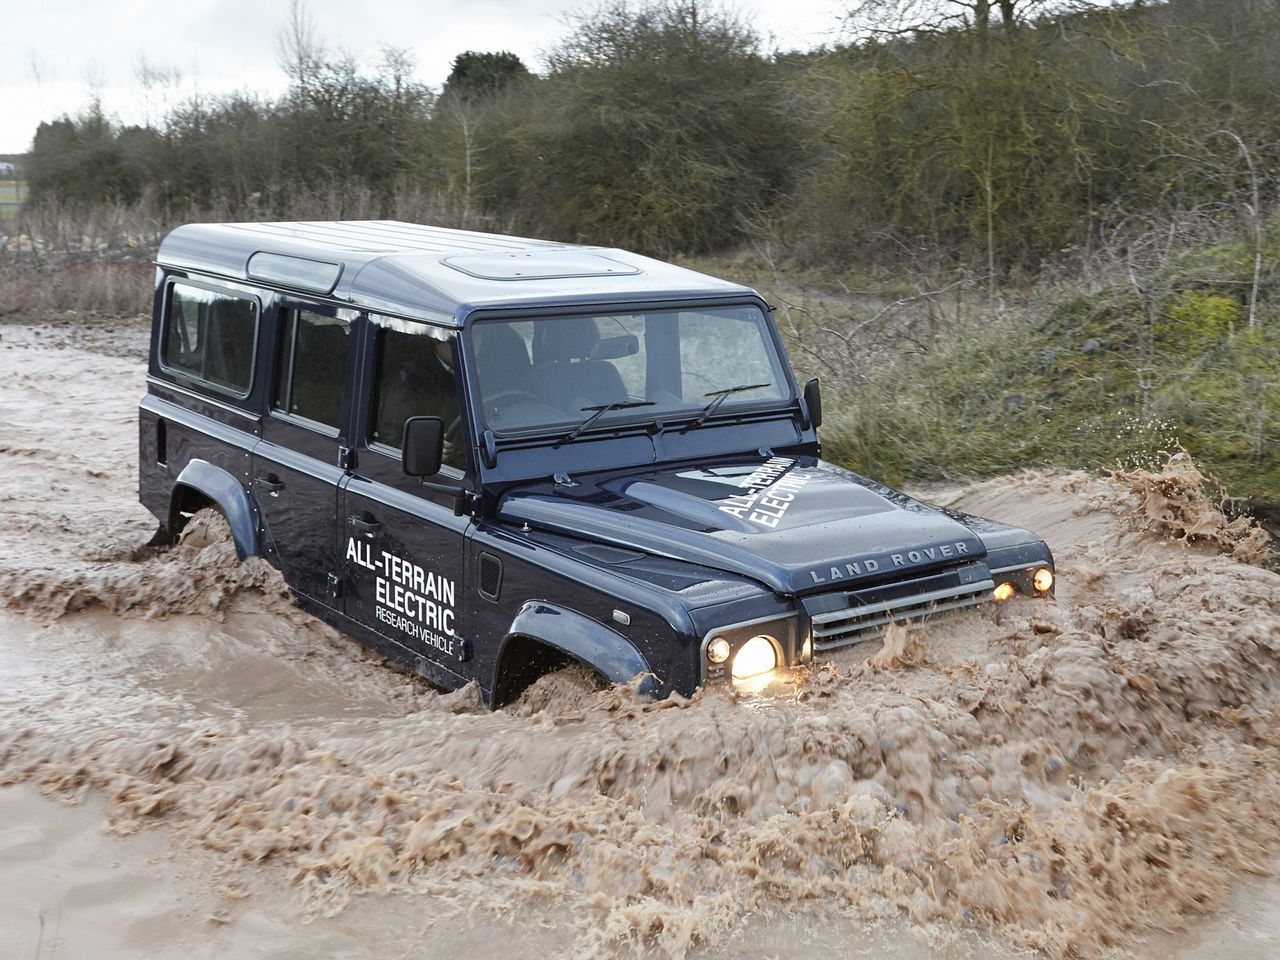 Land Rover Electric Defender Research Vehicle (2013)